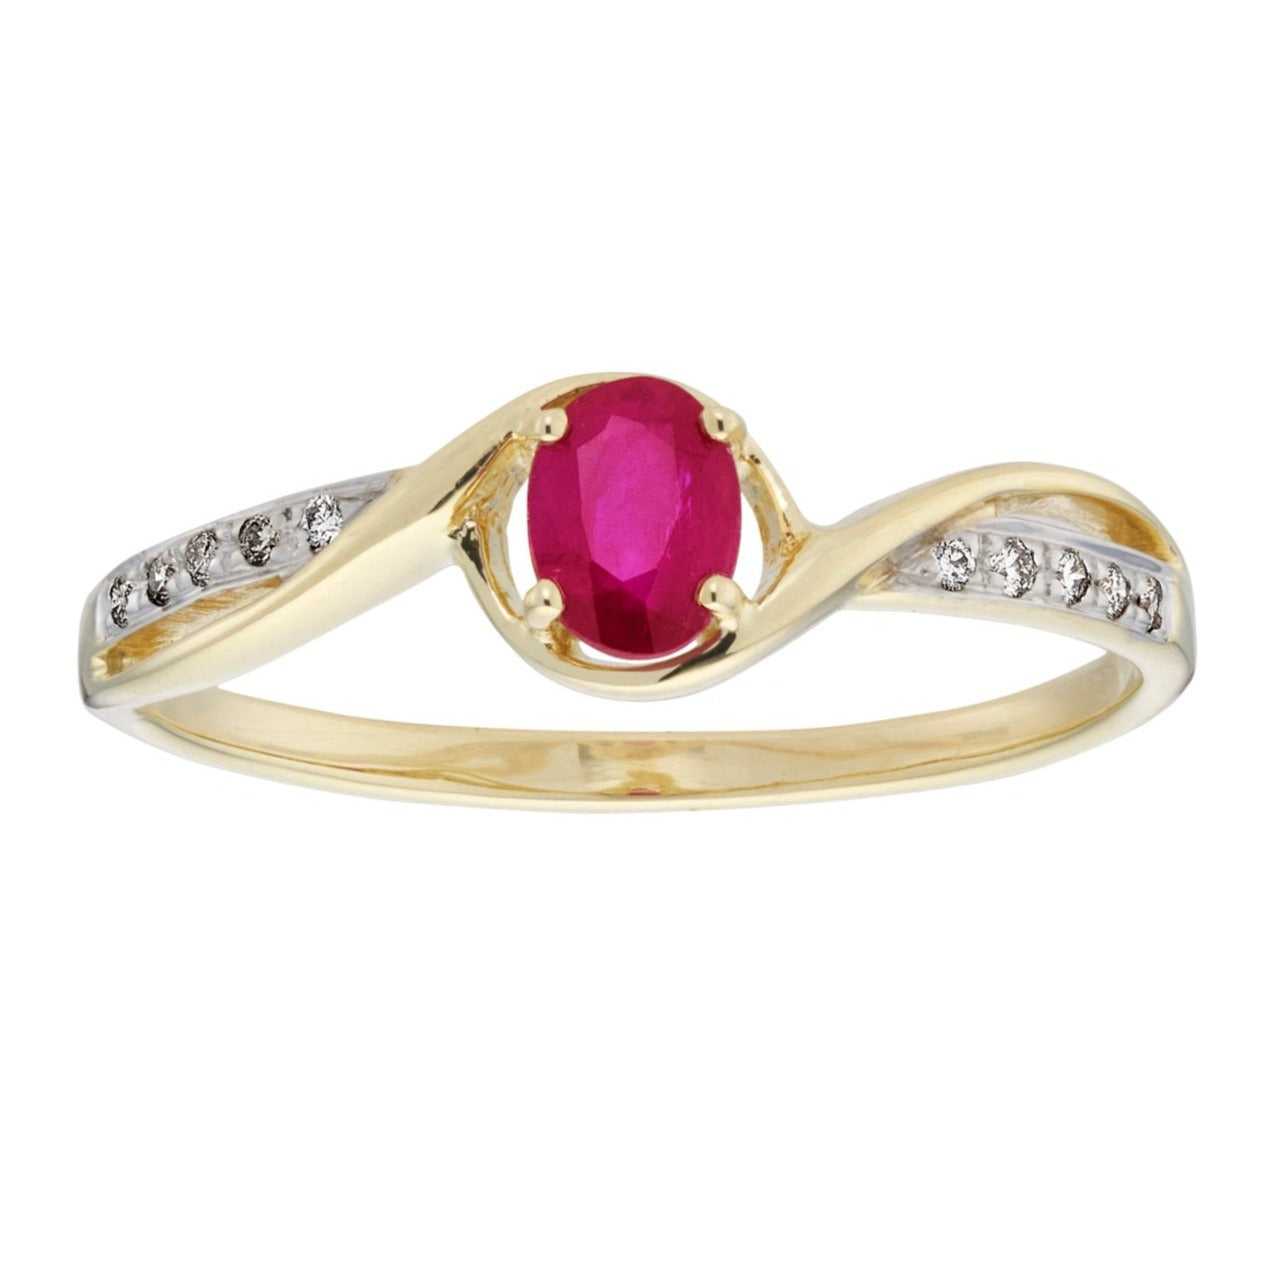 9ct gold 5x4mm oval ruby & diamond ring 0.04ct